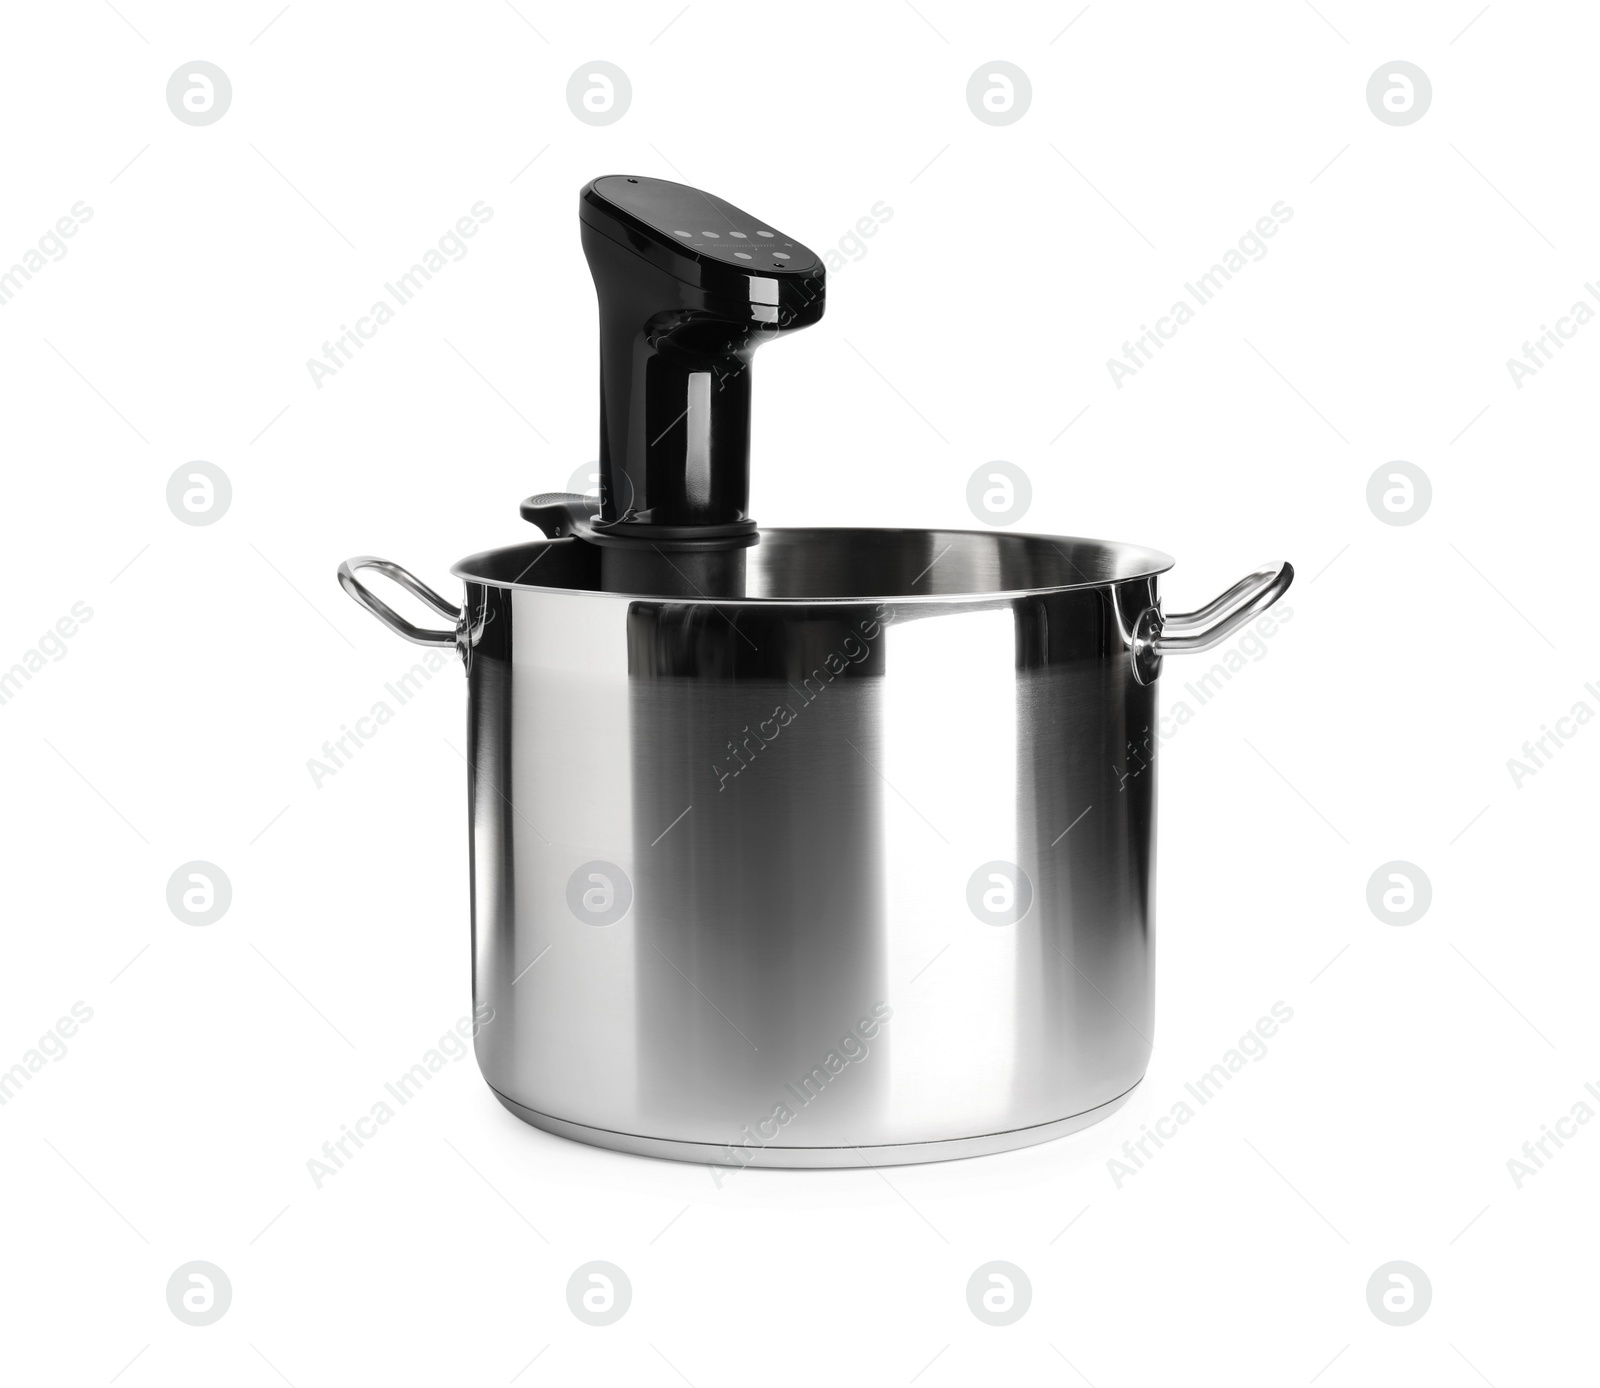 Photo of Thermal immersion circulator in pot isolated on white. Sous vide cooker